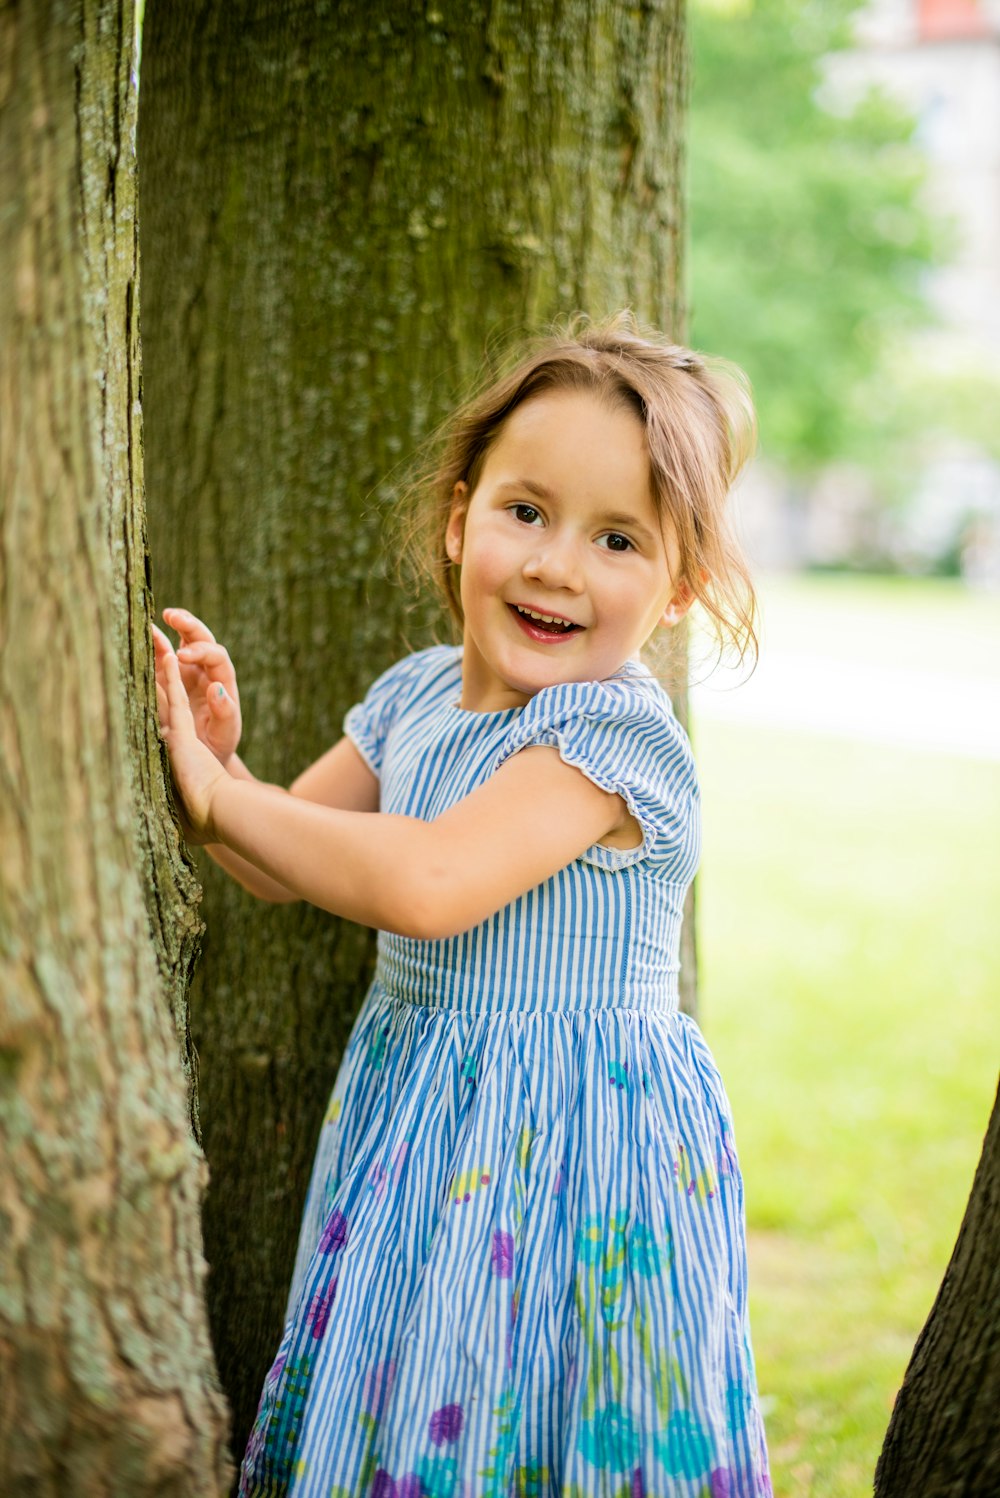 girl in blue and white polka dot dress standing beside brown tree during daytime